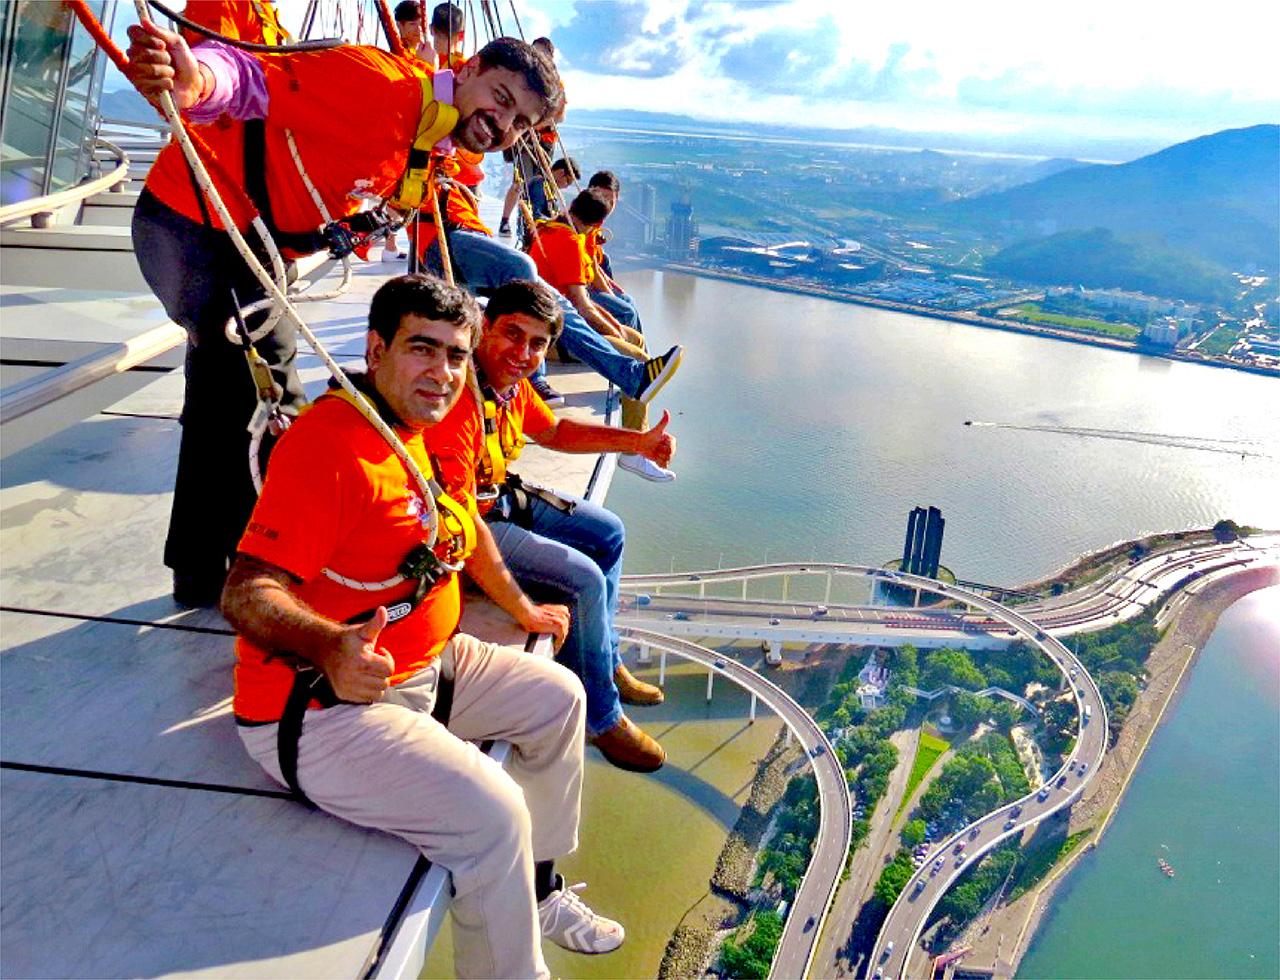 A group of business delegates enjoying a fun, thrilling skywalk experience at Macau tower